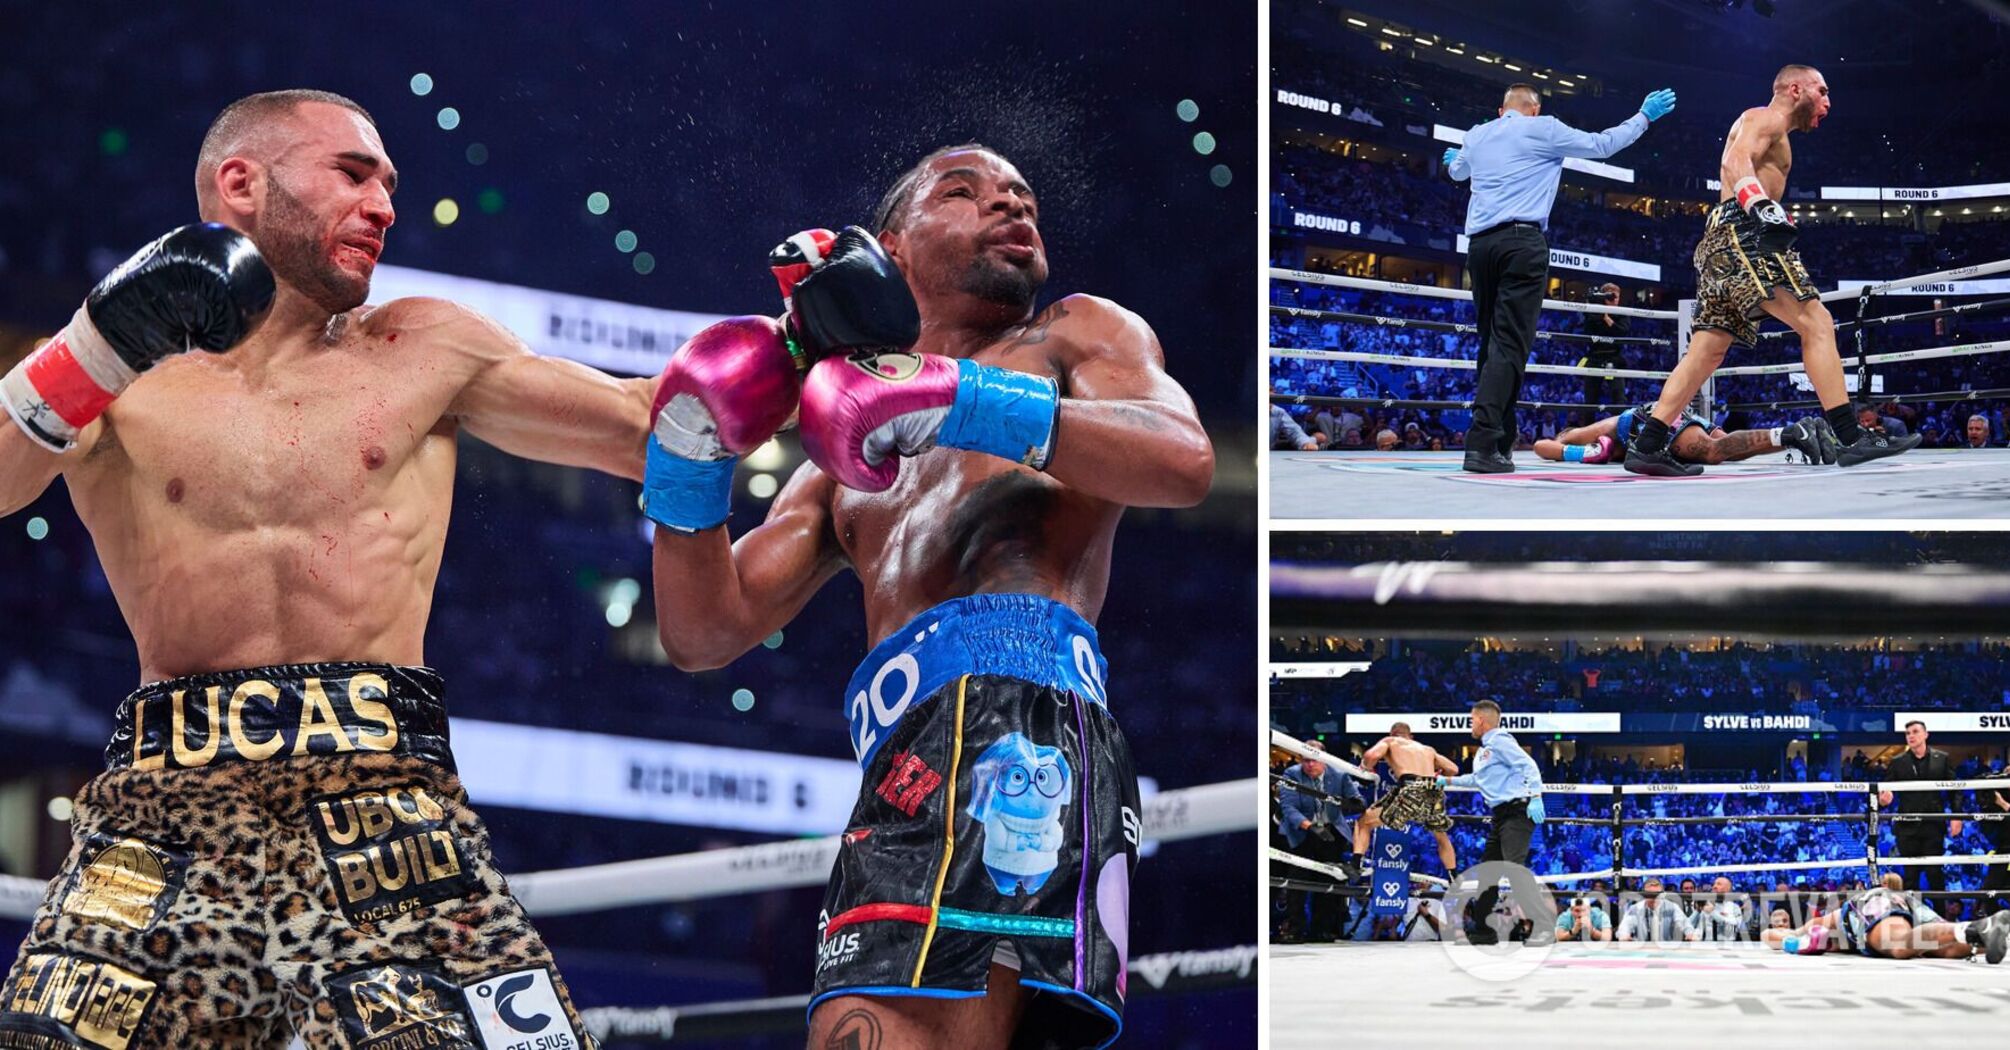 Upset of the year! The undefeated boxer was winning the fight, but sensationally got knocked out with a heavy headbutt into the ring. Video